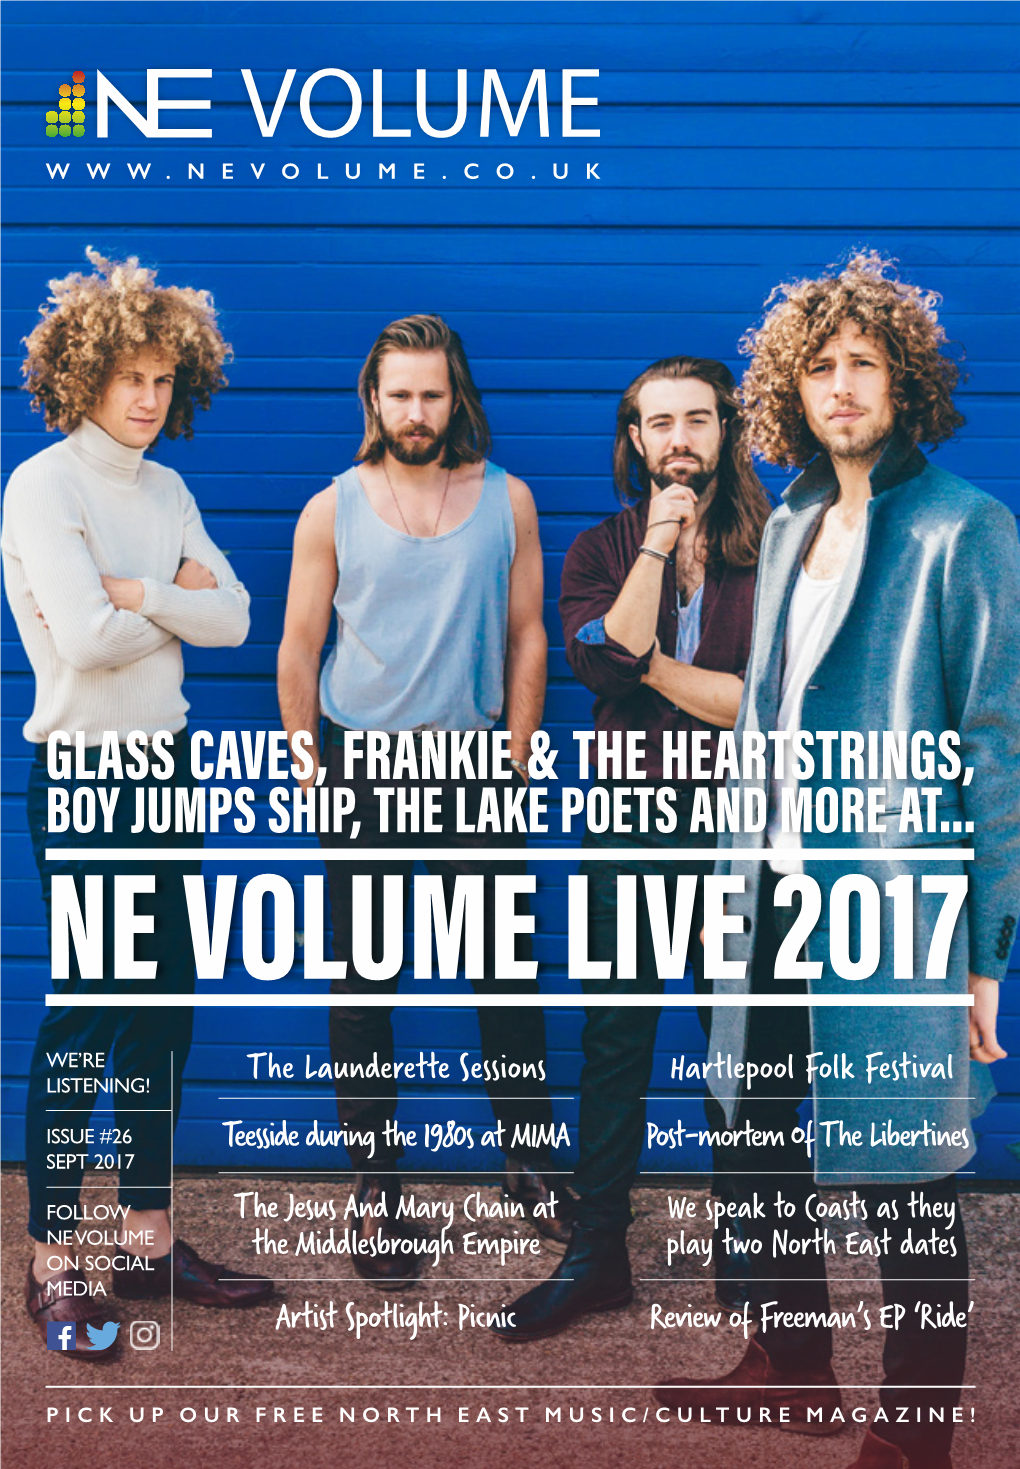 Glass Caves, Frankie & the Heartstrings